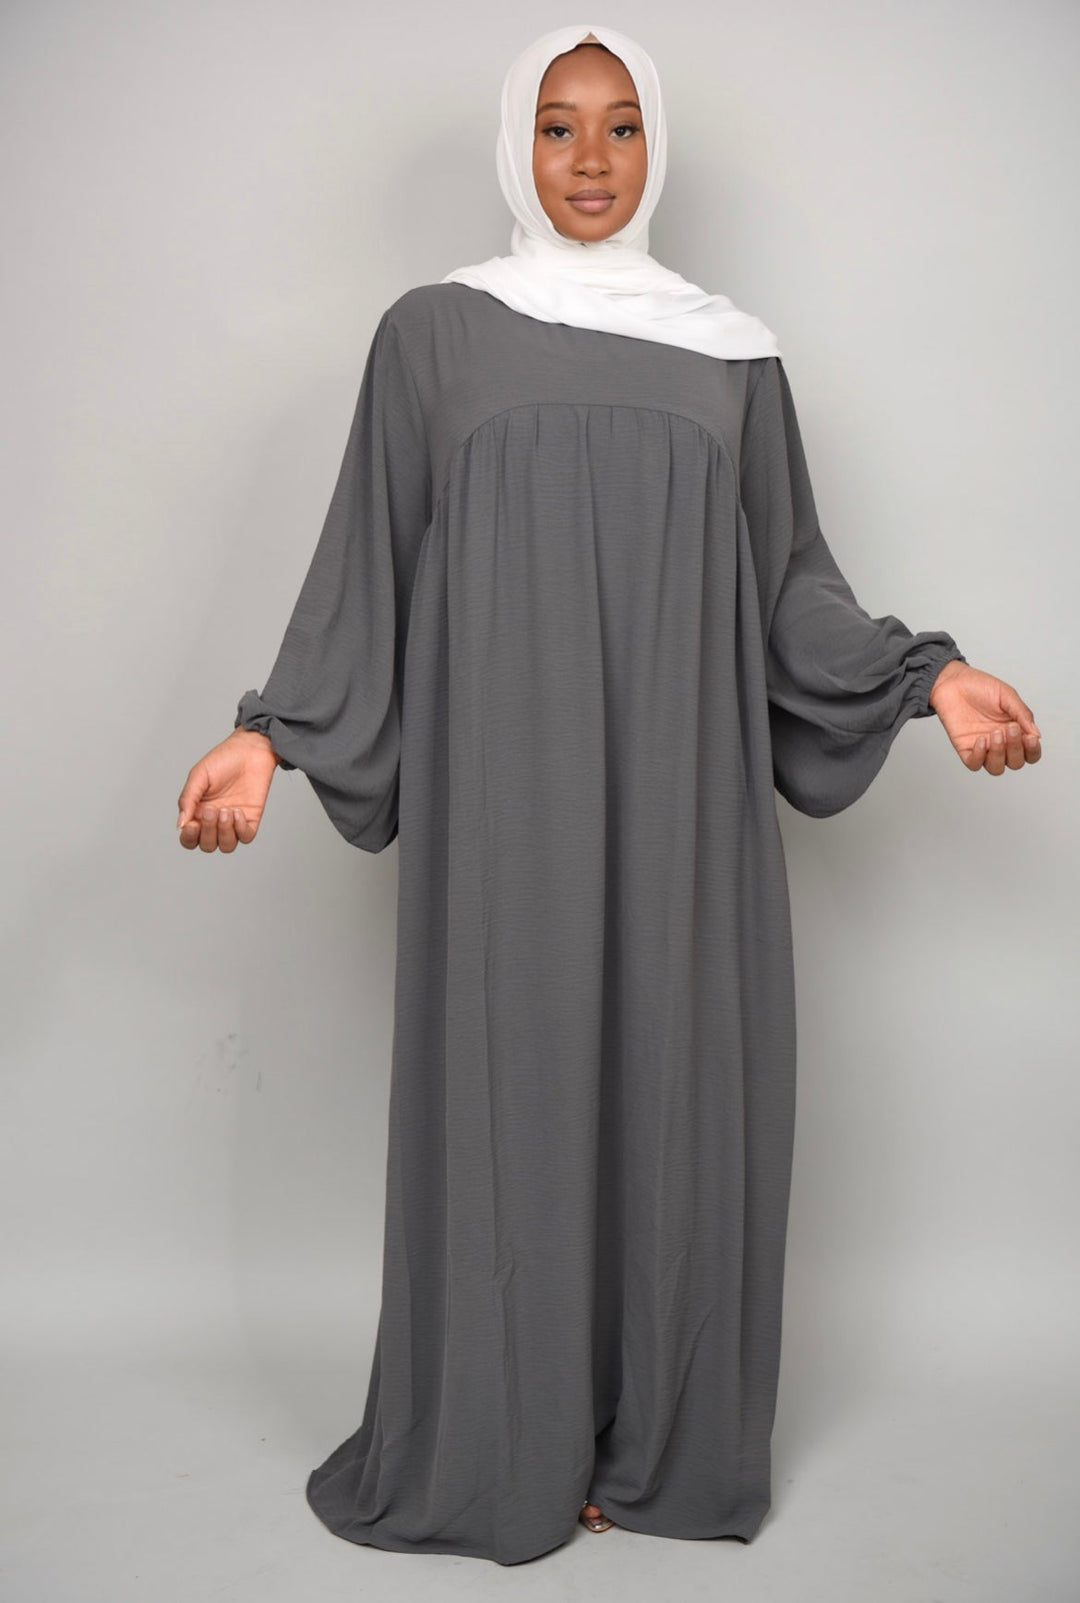 Get trendy with Amelia Textured Abaya - Dark Gray -  available at Voilee NY. Grab yours for $54.90 today!